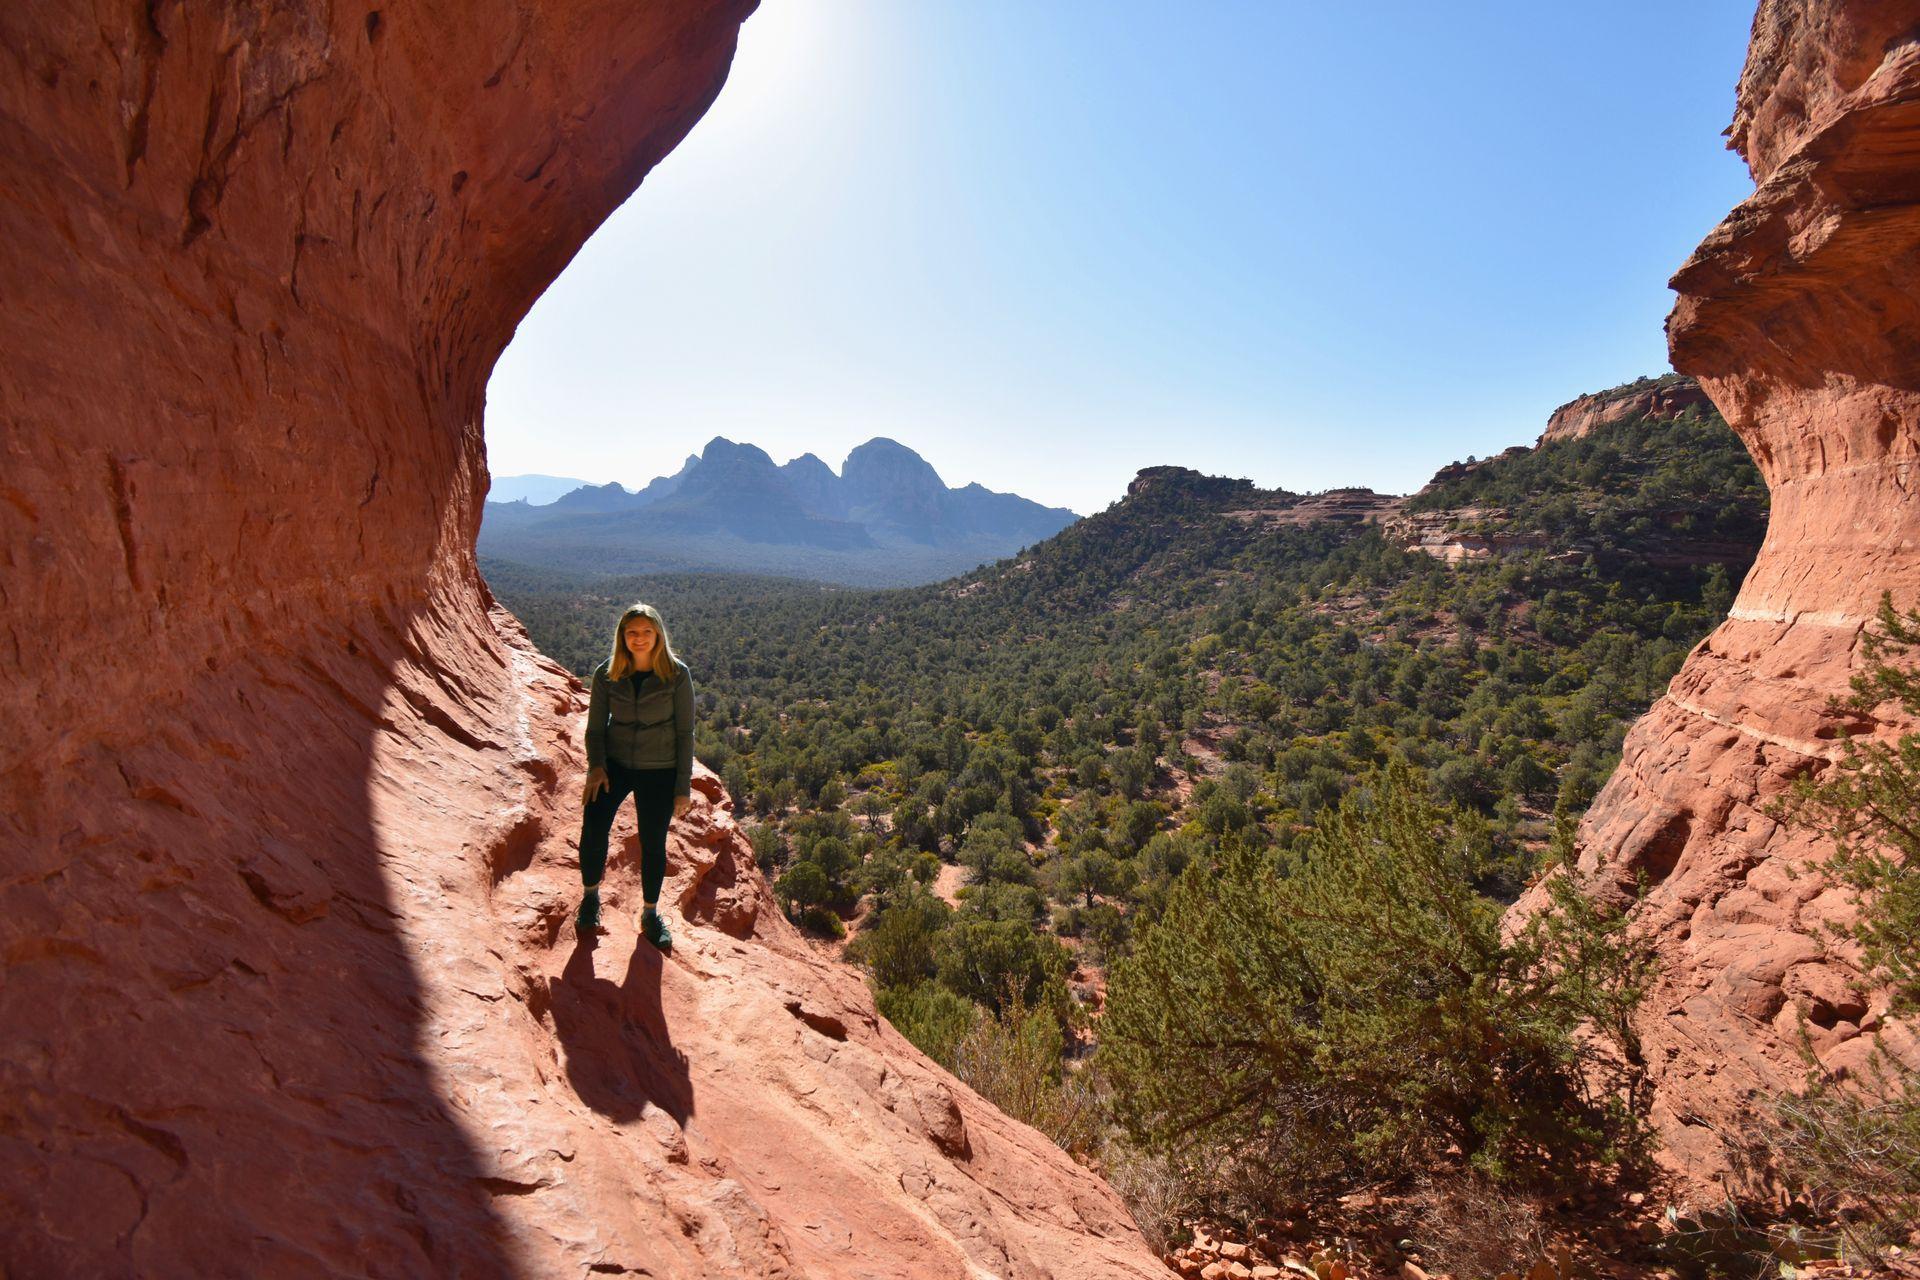 Lydia standing on the edge of Birthing Cave with a view of Sedona in the background.